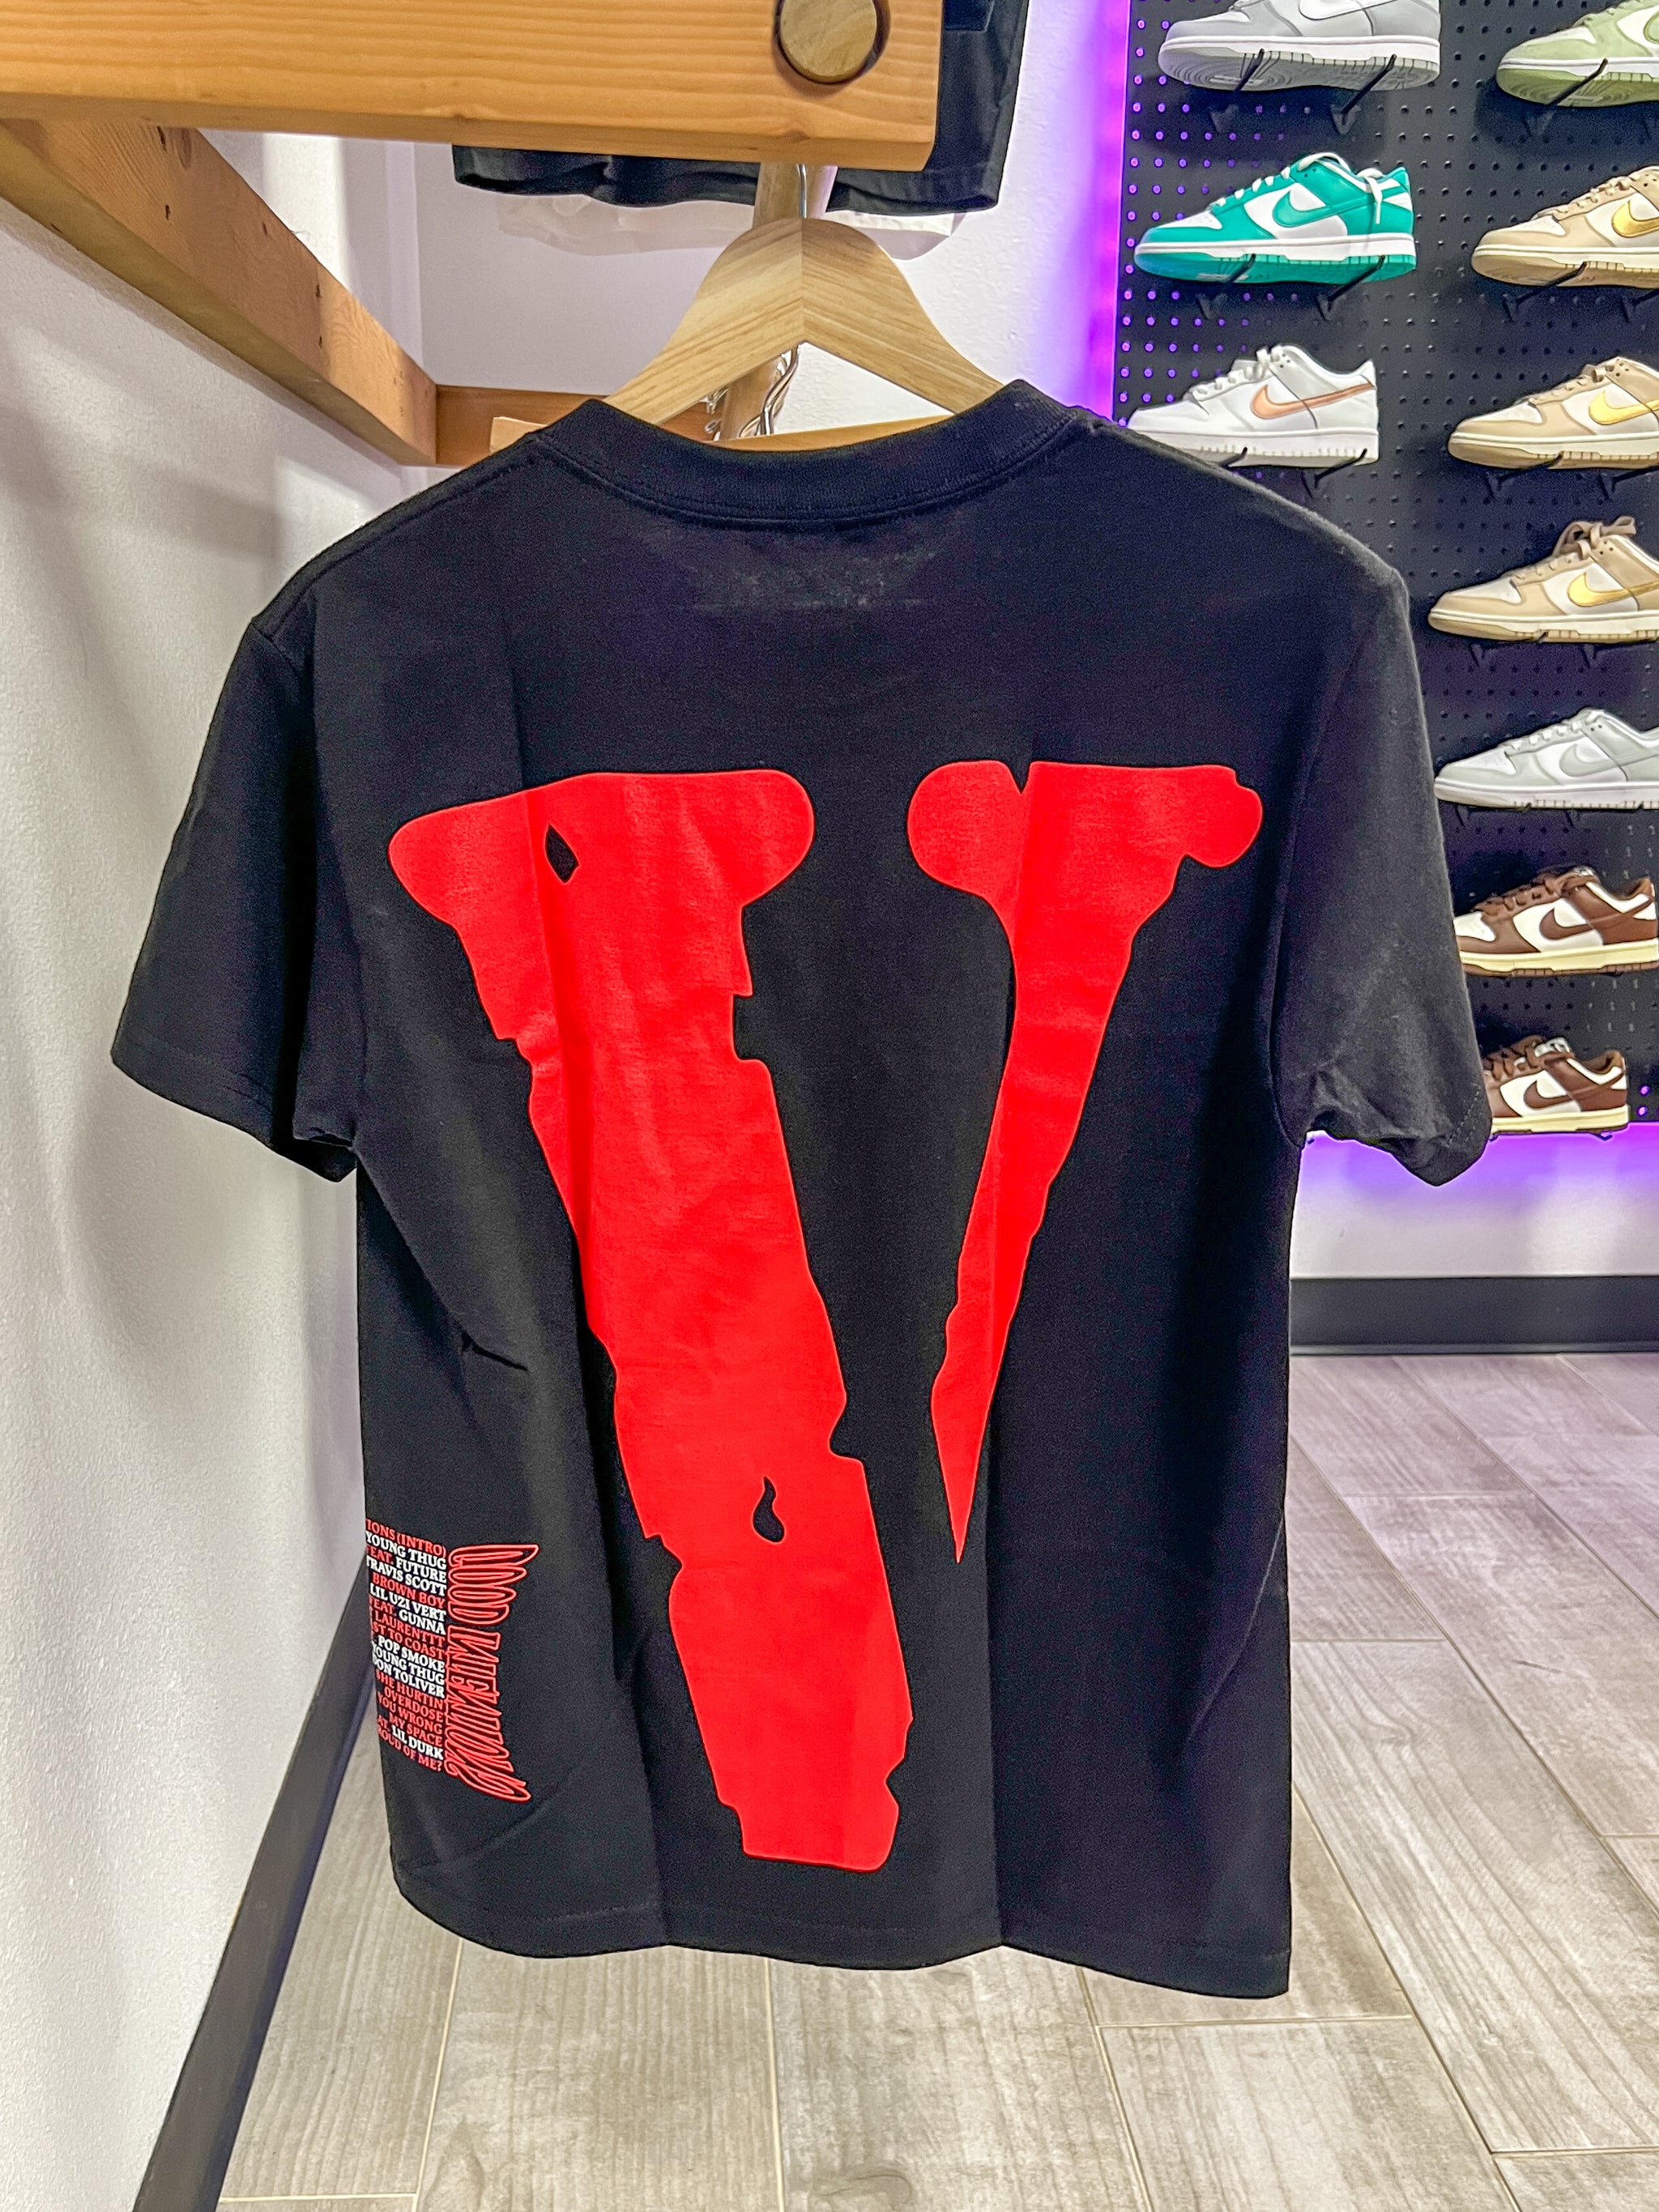 VLONE TEE BLACK RED BAD HABITS BUT GOOD INTENTIONS